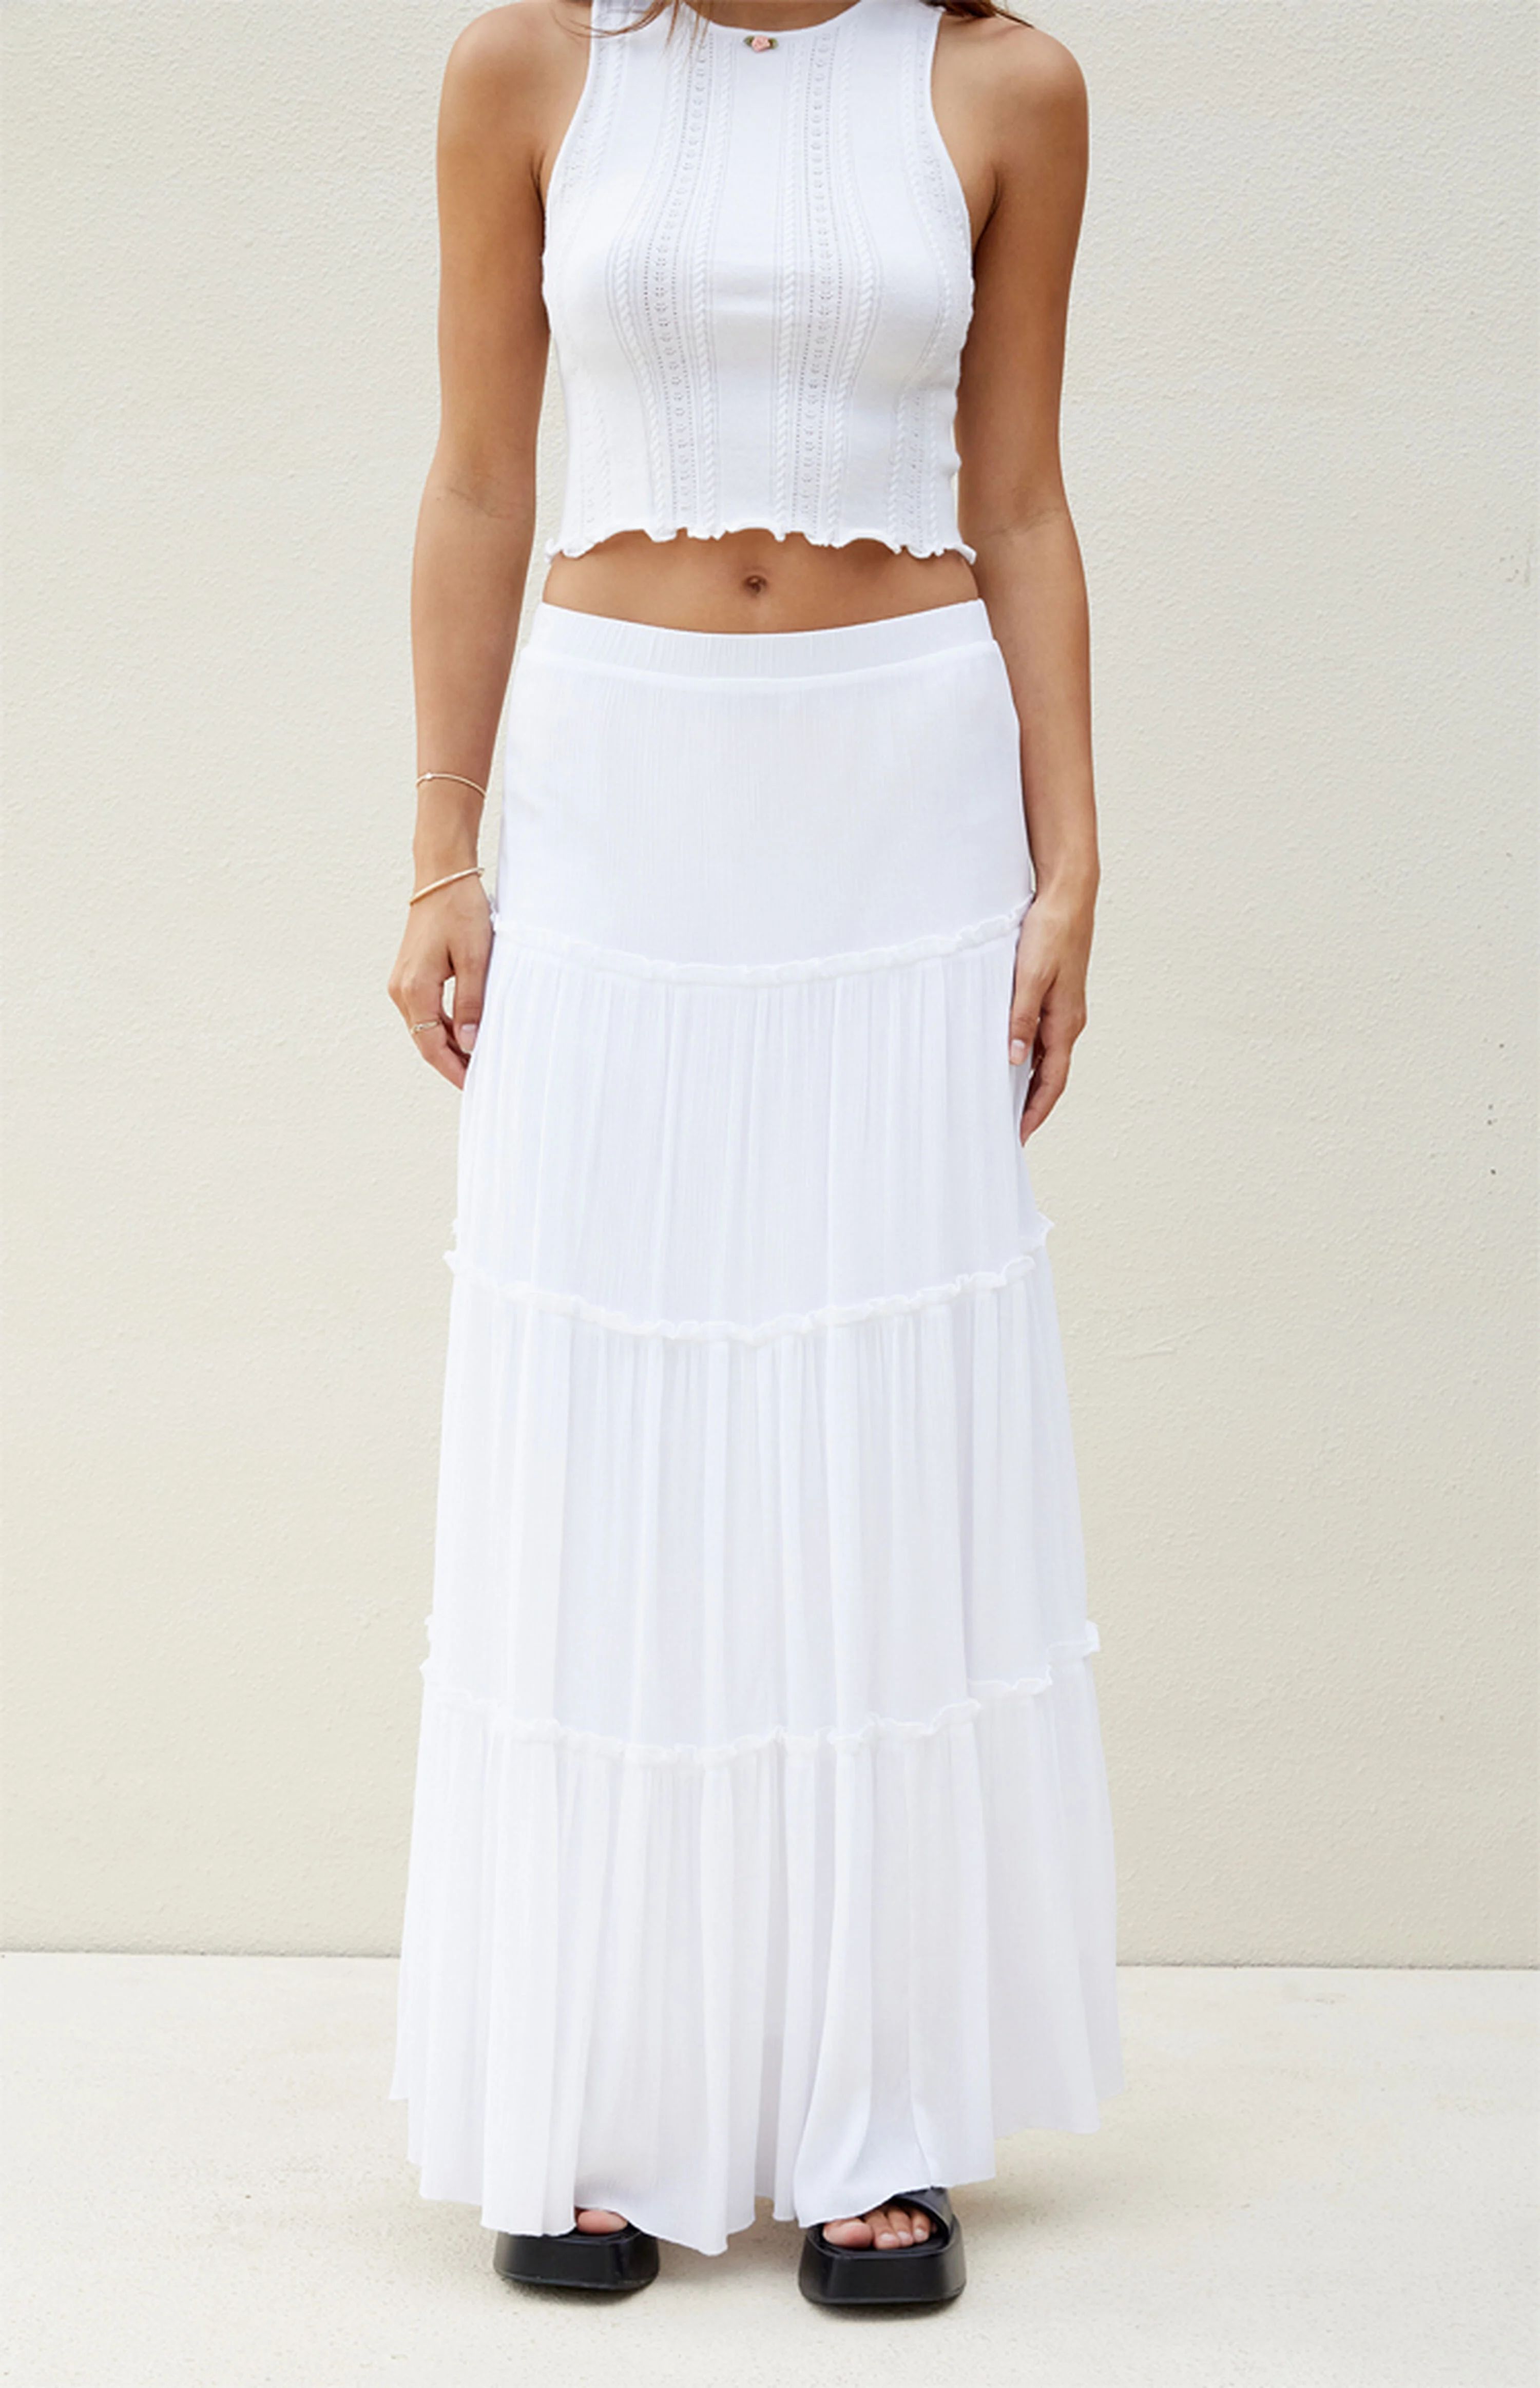 Beverly & Beck White Tiered Maxi Skirt | PacSun